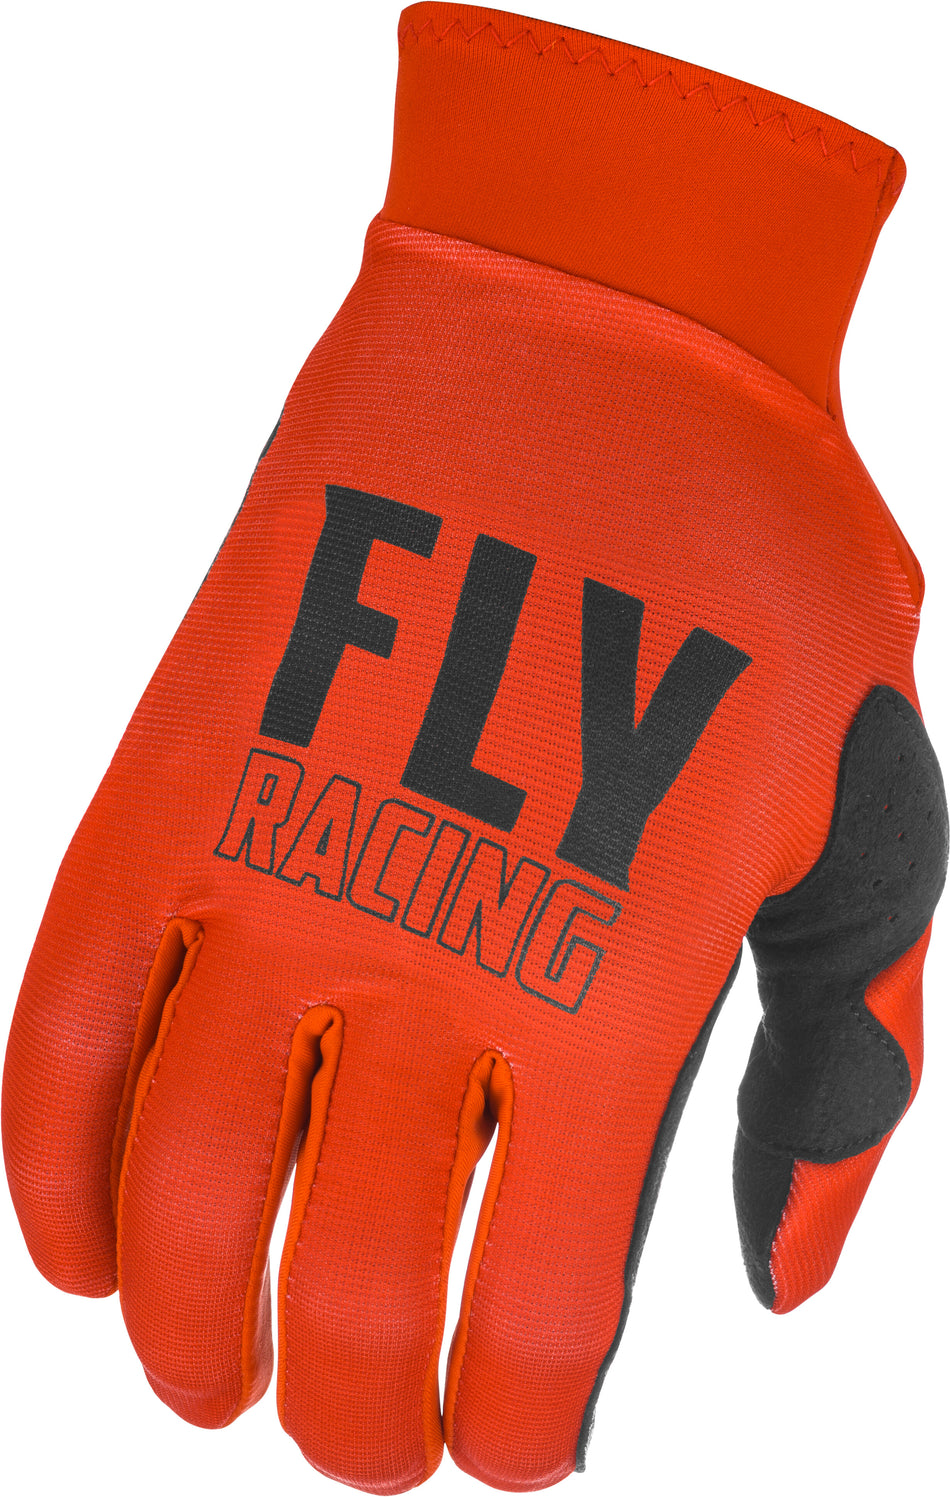 FLY RACING Pro Lite Gloves Red/Black Sm 374-852S